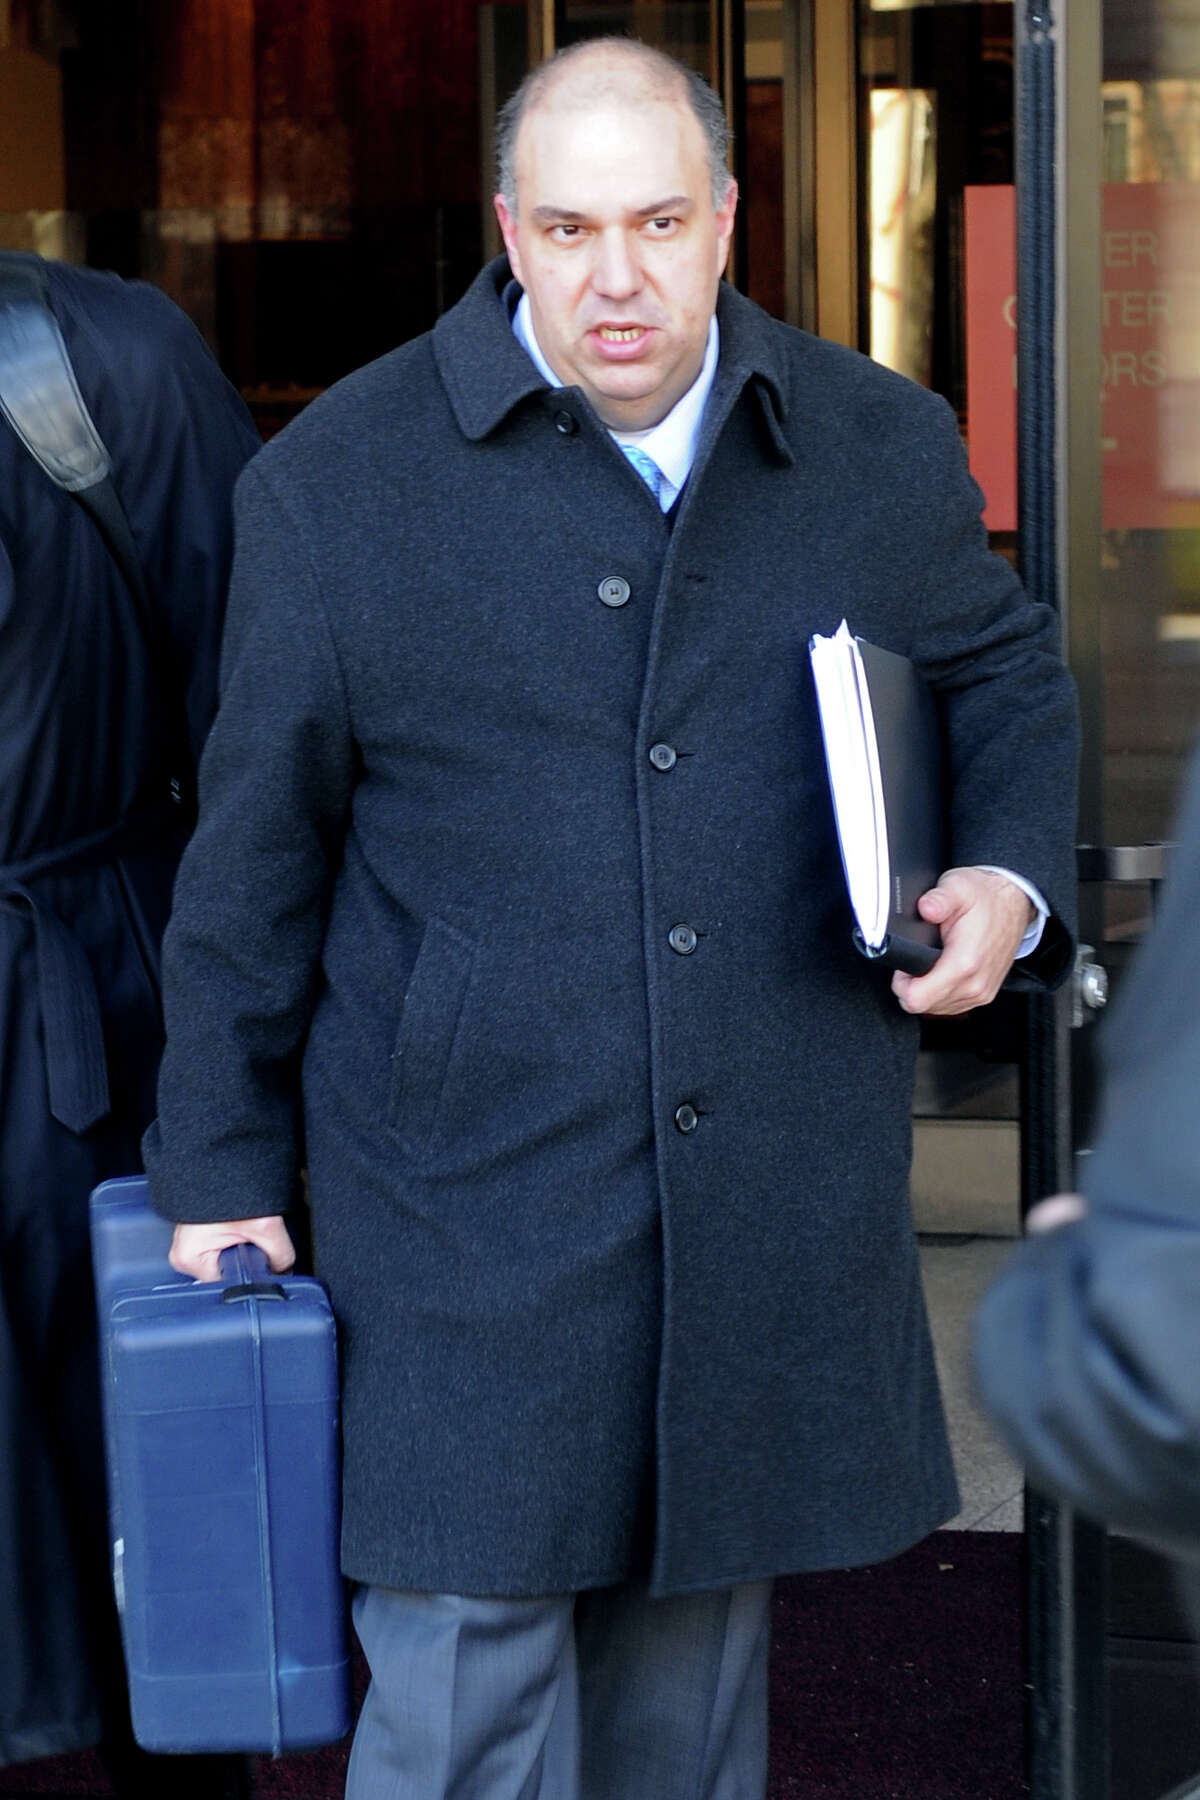 Francisco Illarramendi leaves Federal Court in Bridgeport, Conn. Monday, March, 7th, 2011, where he plead guilty to five counts involving investment advising and securities fraud.